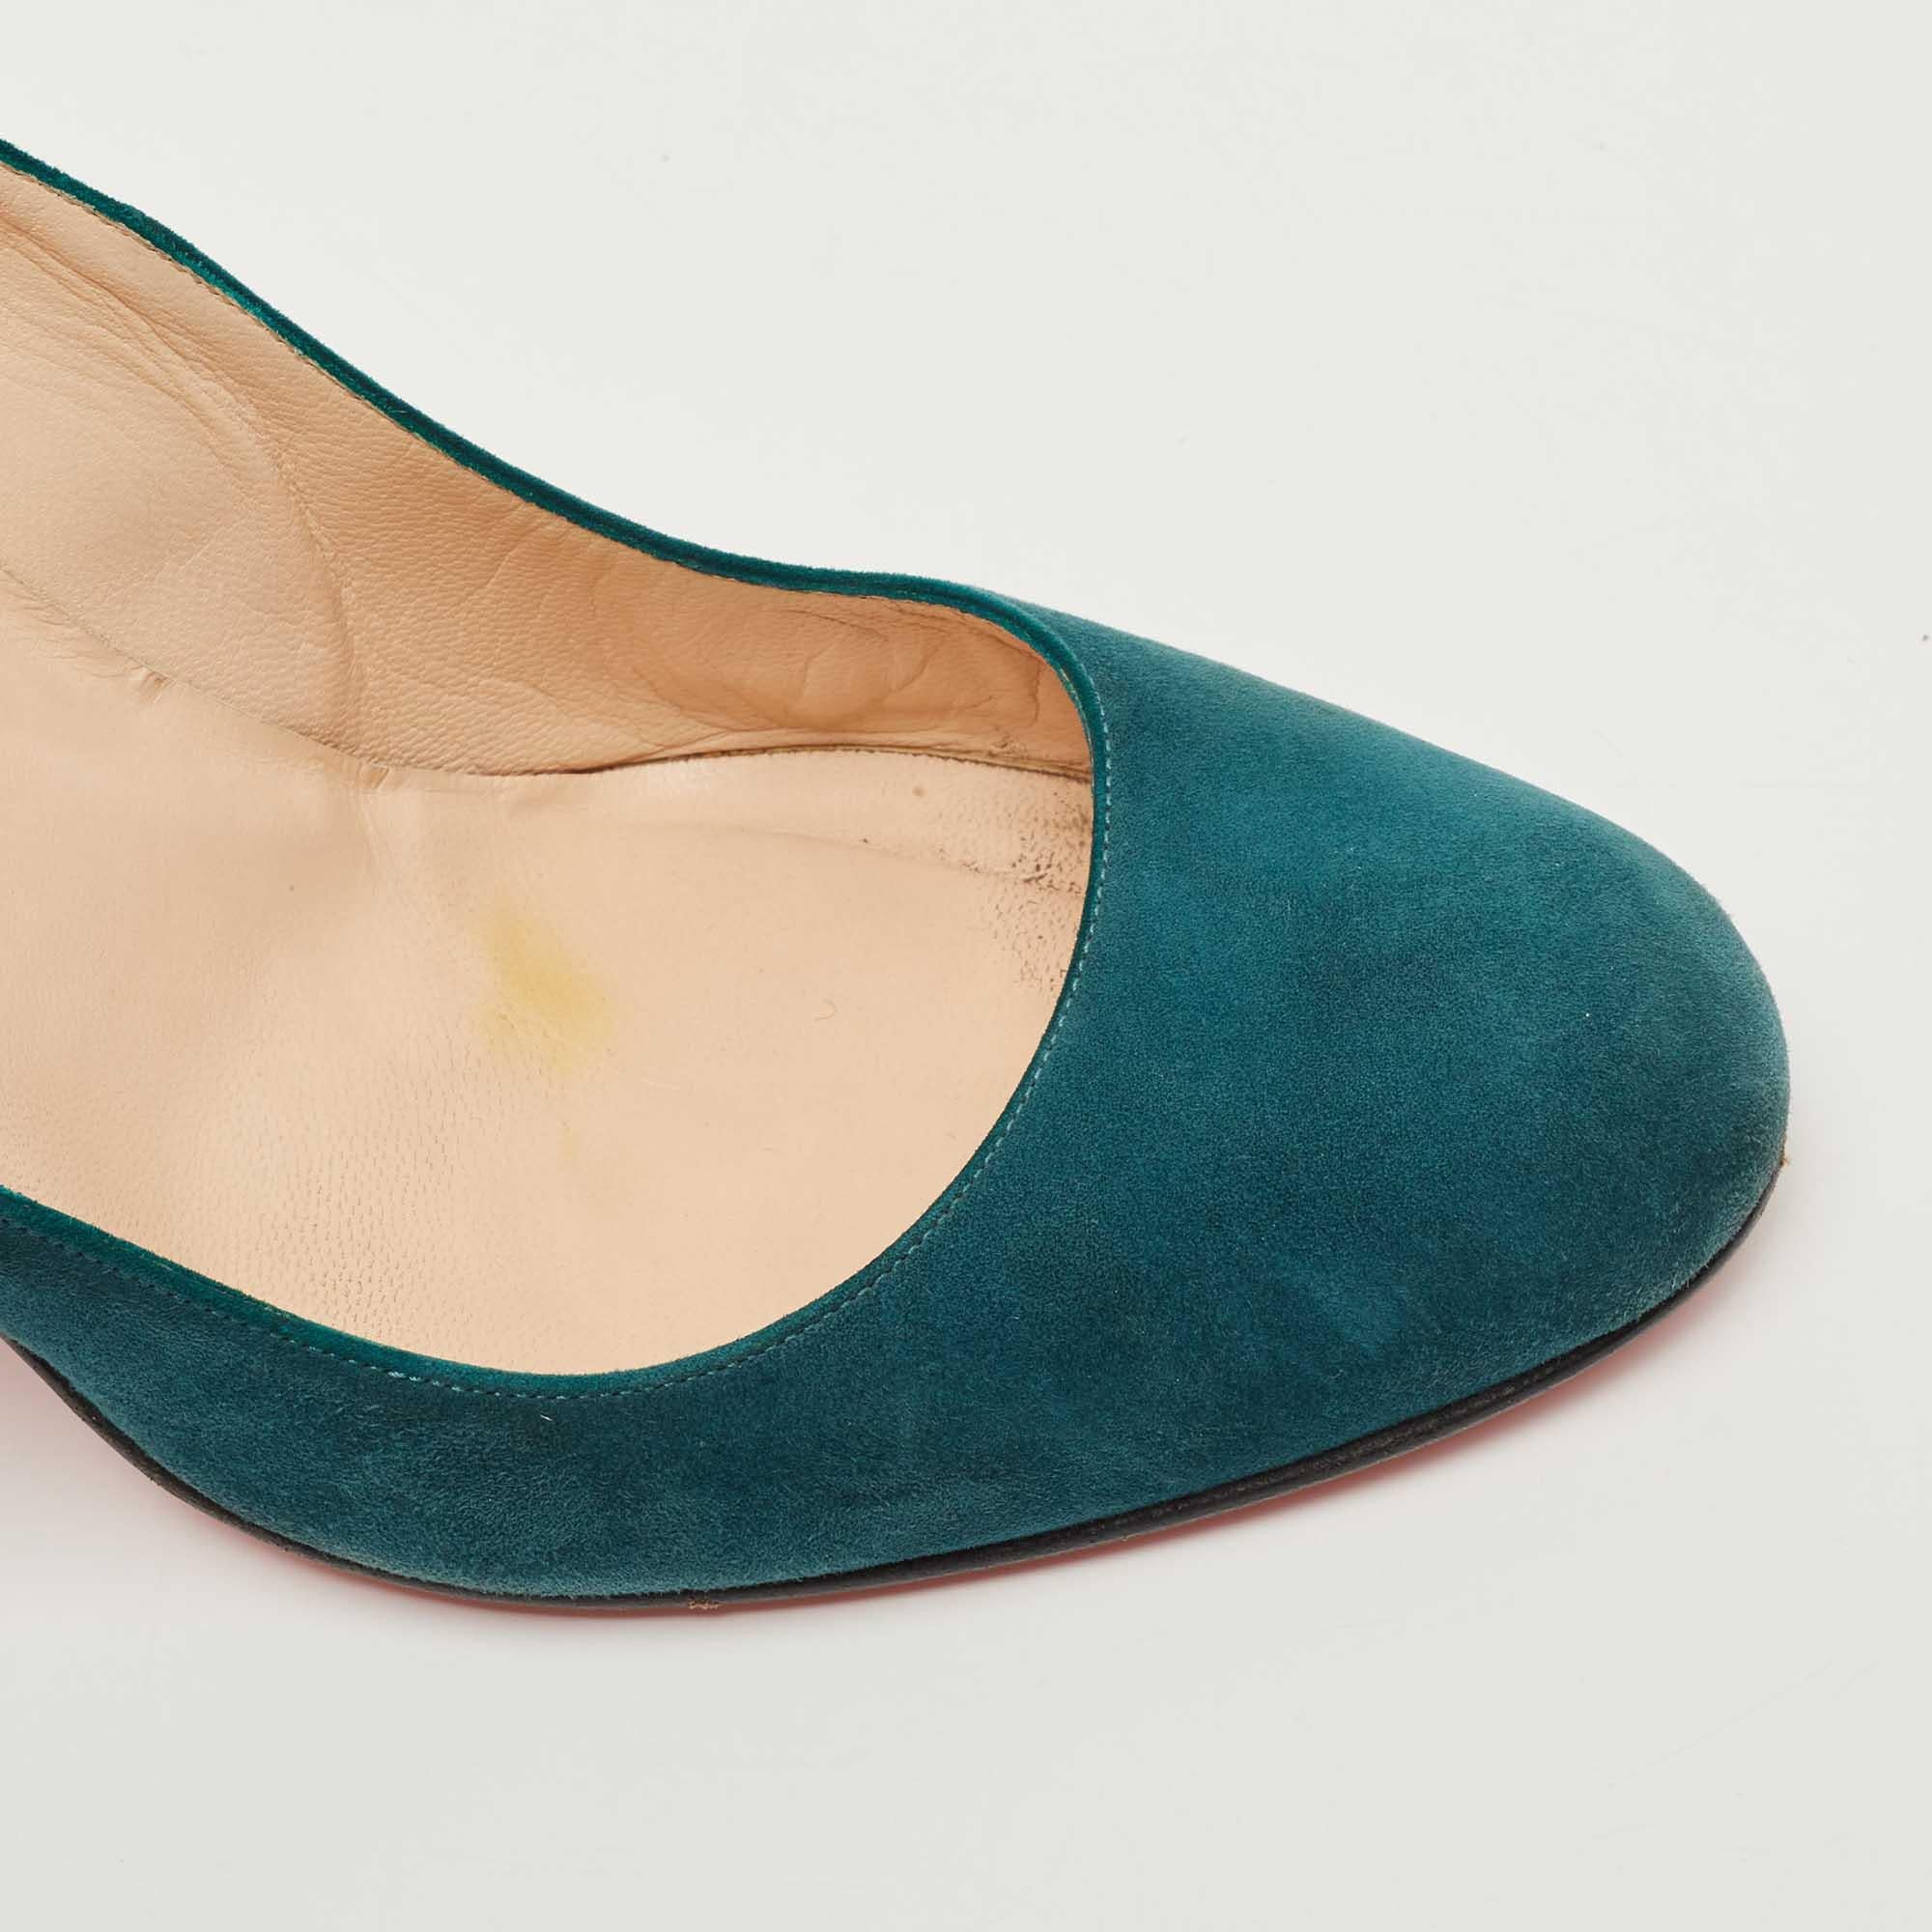 Christian Louboutin Teal Suede Simple Pumps Size 40.5 1